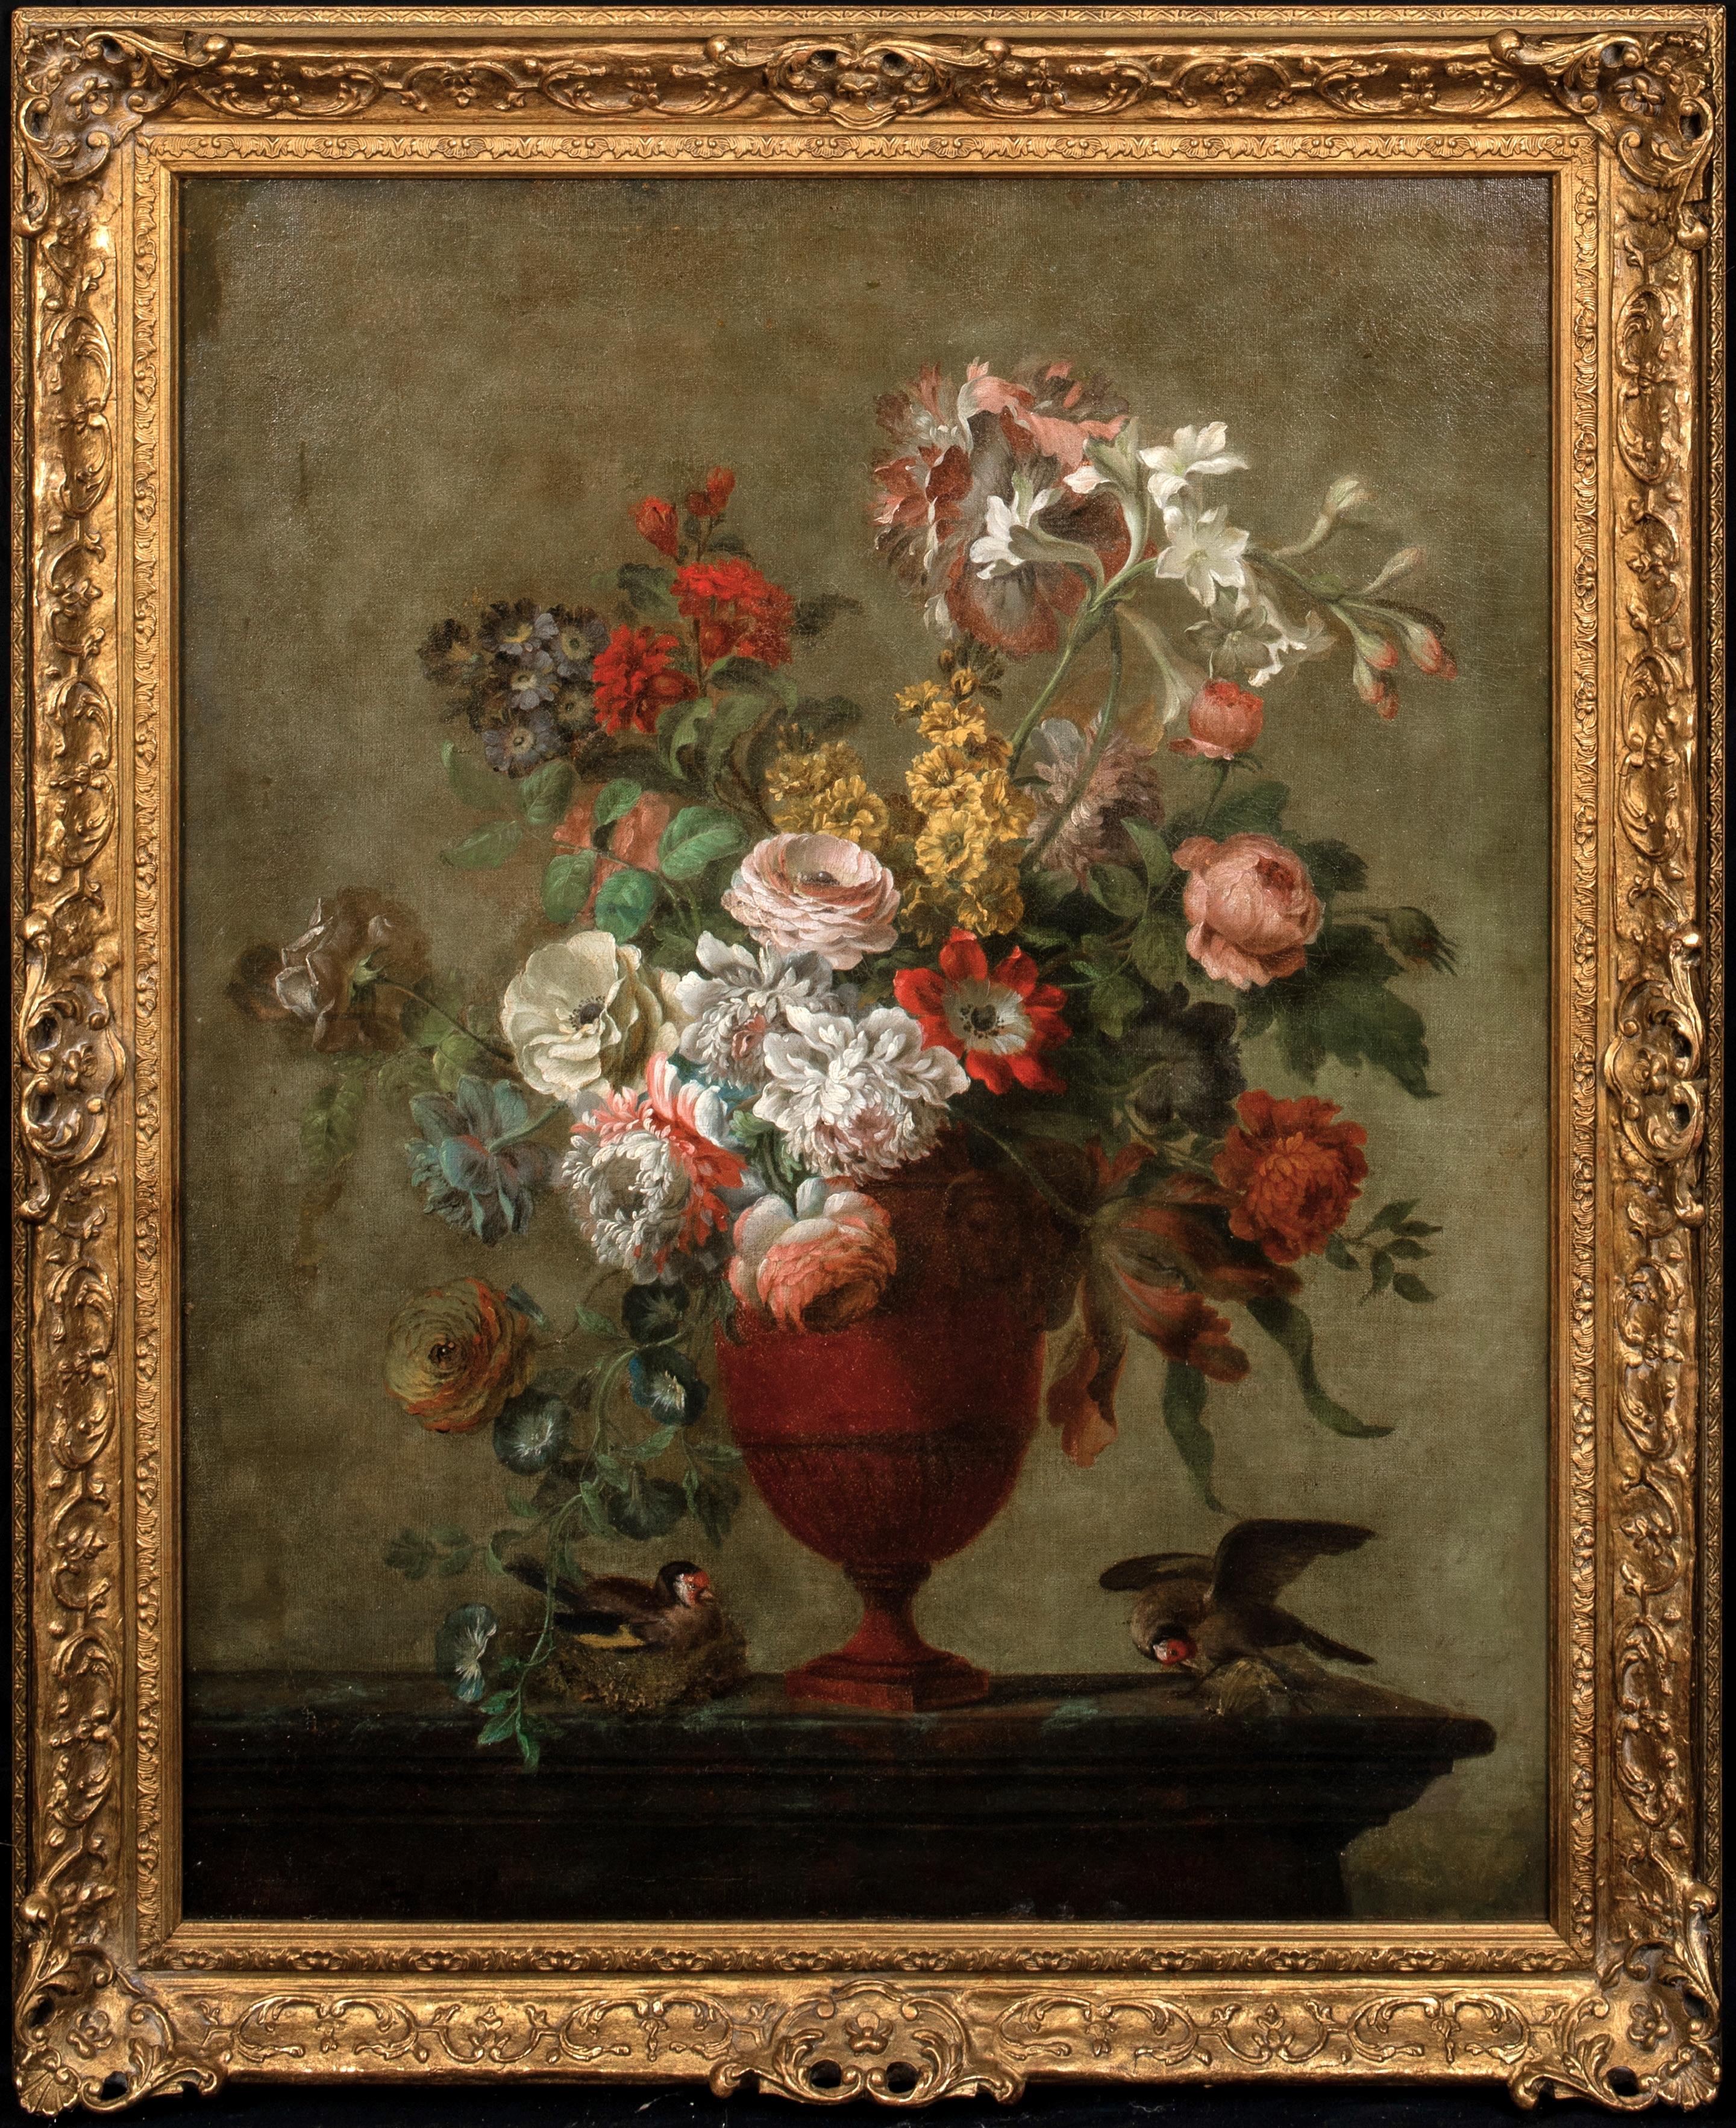 Unknown Still-Life Painting - Still Life Of Flower & Goldfinches, circa 1700